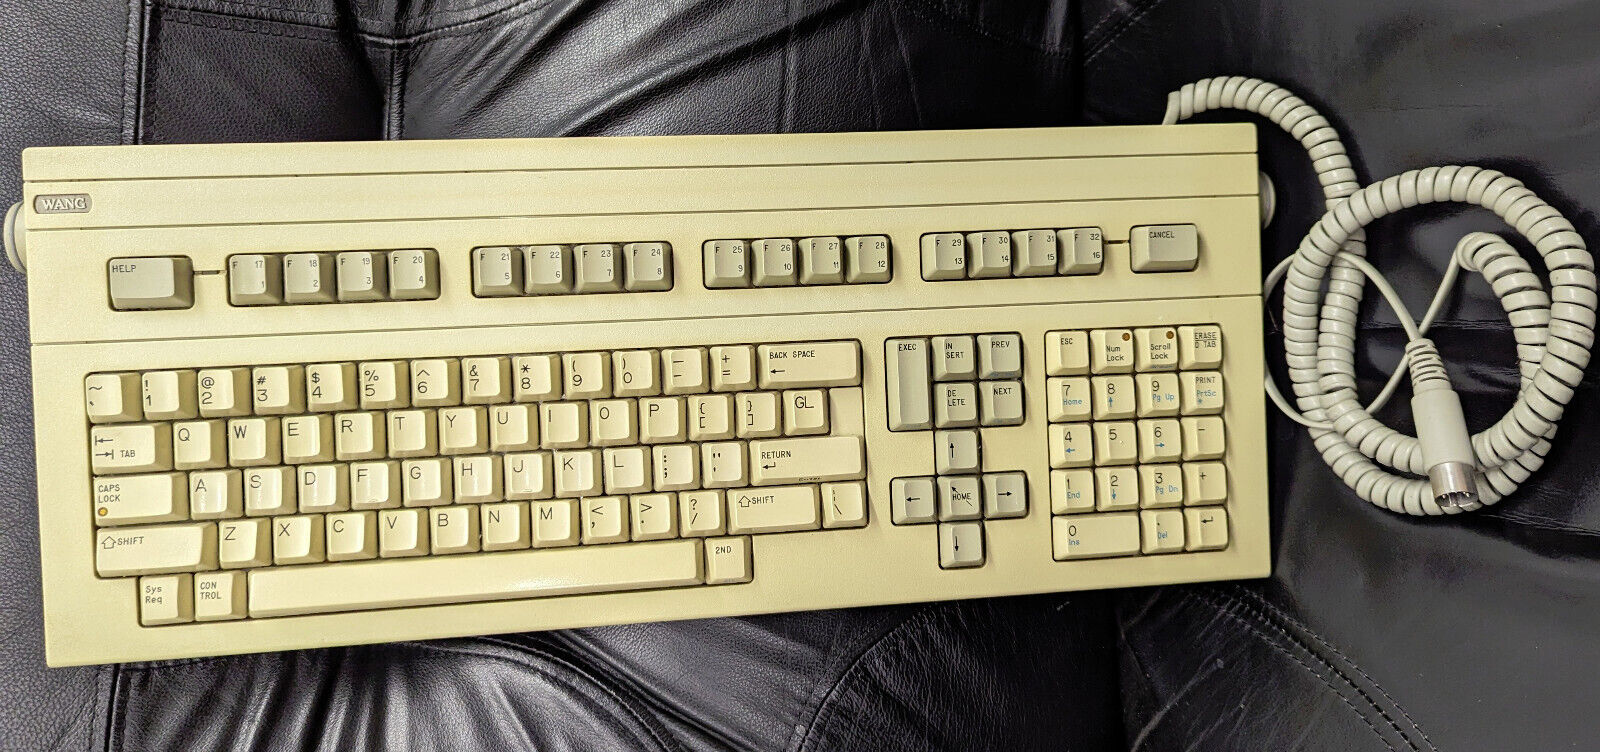 Wang 723 XT/AT Mechanical Keyboard Vintage W/Original Cable Excellent Clean